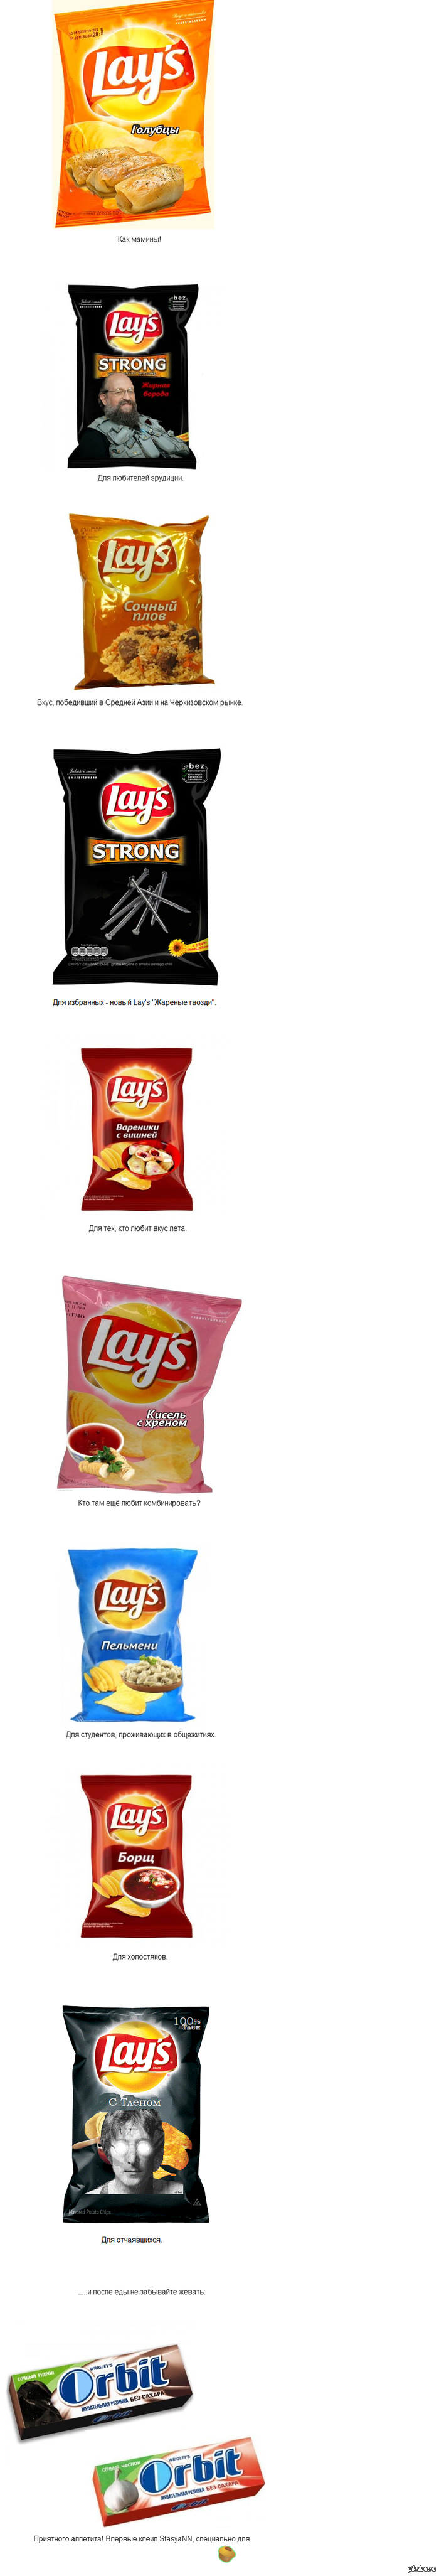      &quot;Lay's&quot;!      @comissario  @allvex     ( <a href="http://pikabu.ru/story/chipsyi_1539635">http://pikabu.ru/story/_1539635</a> ) .    !